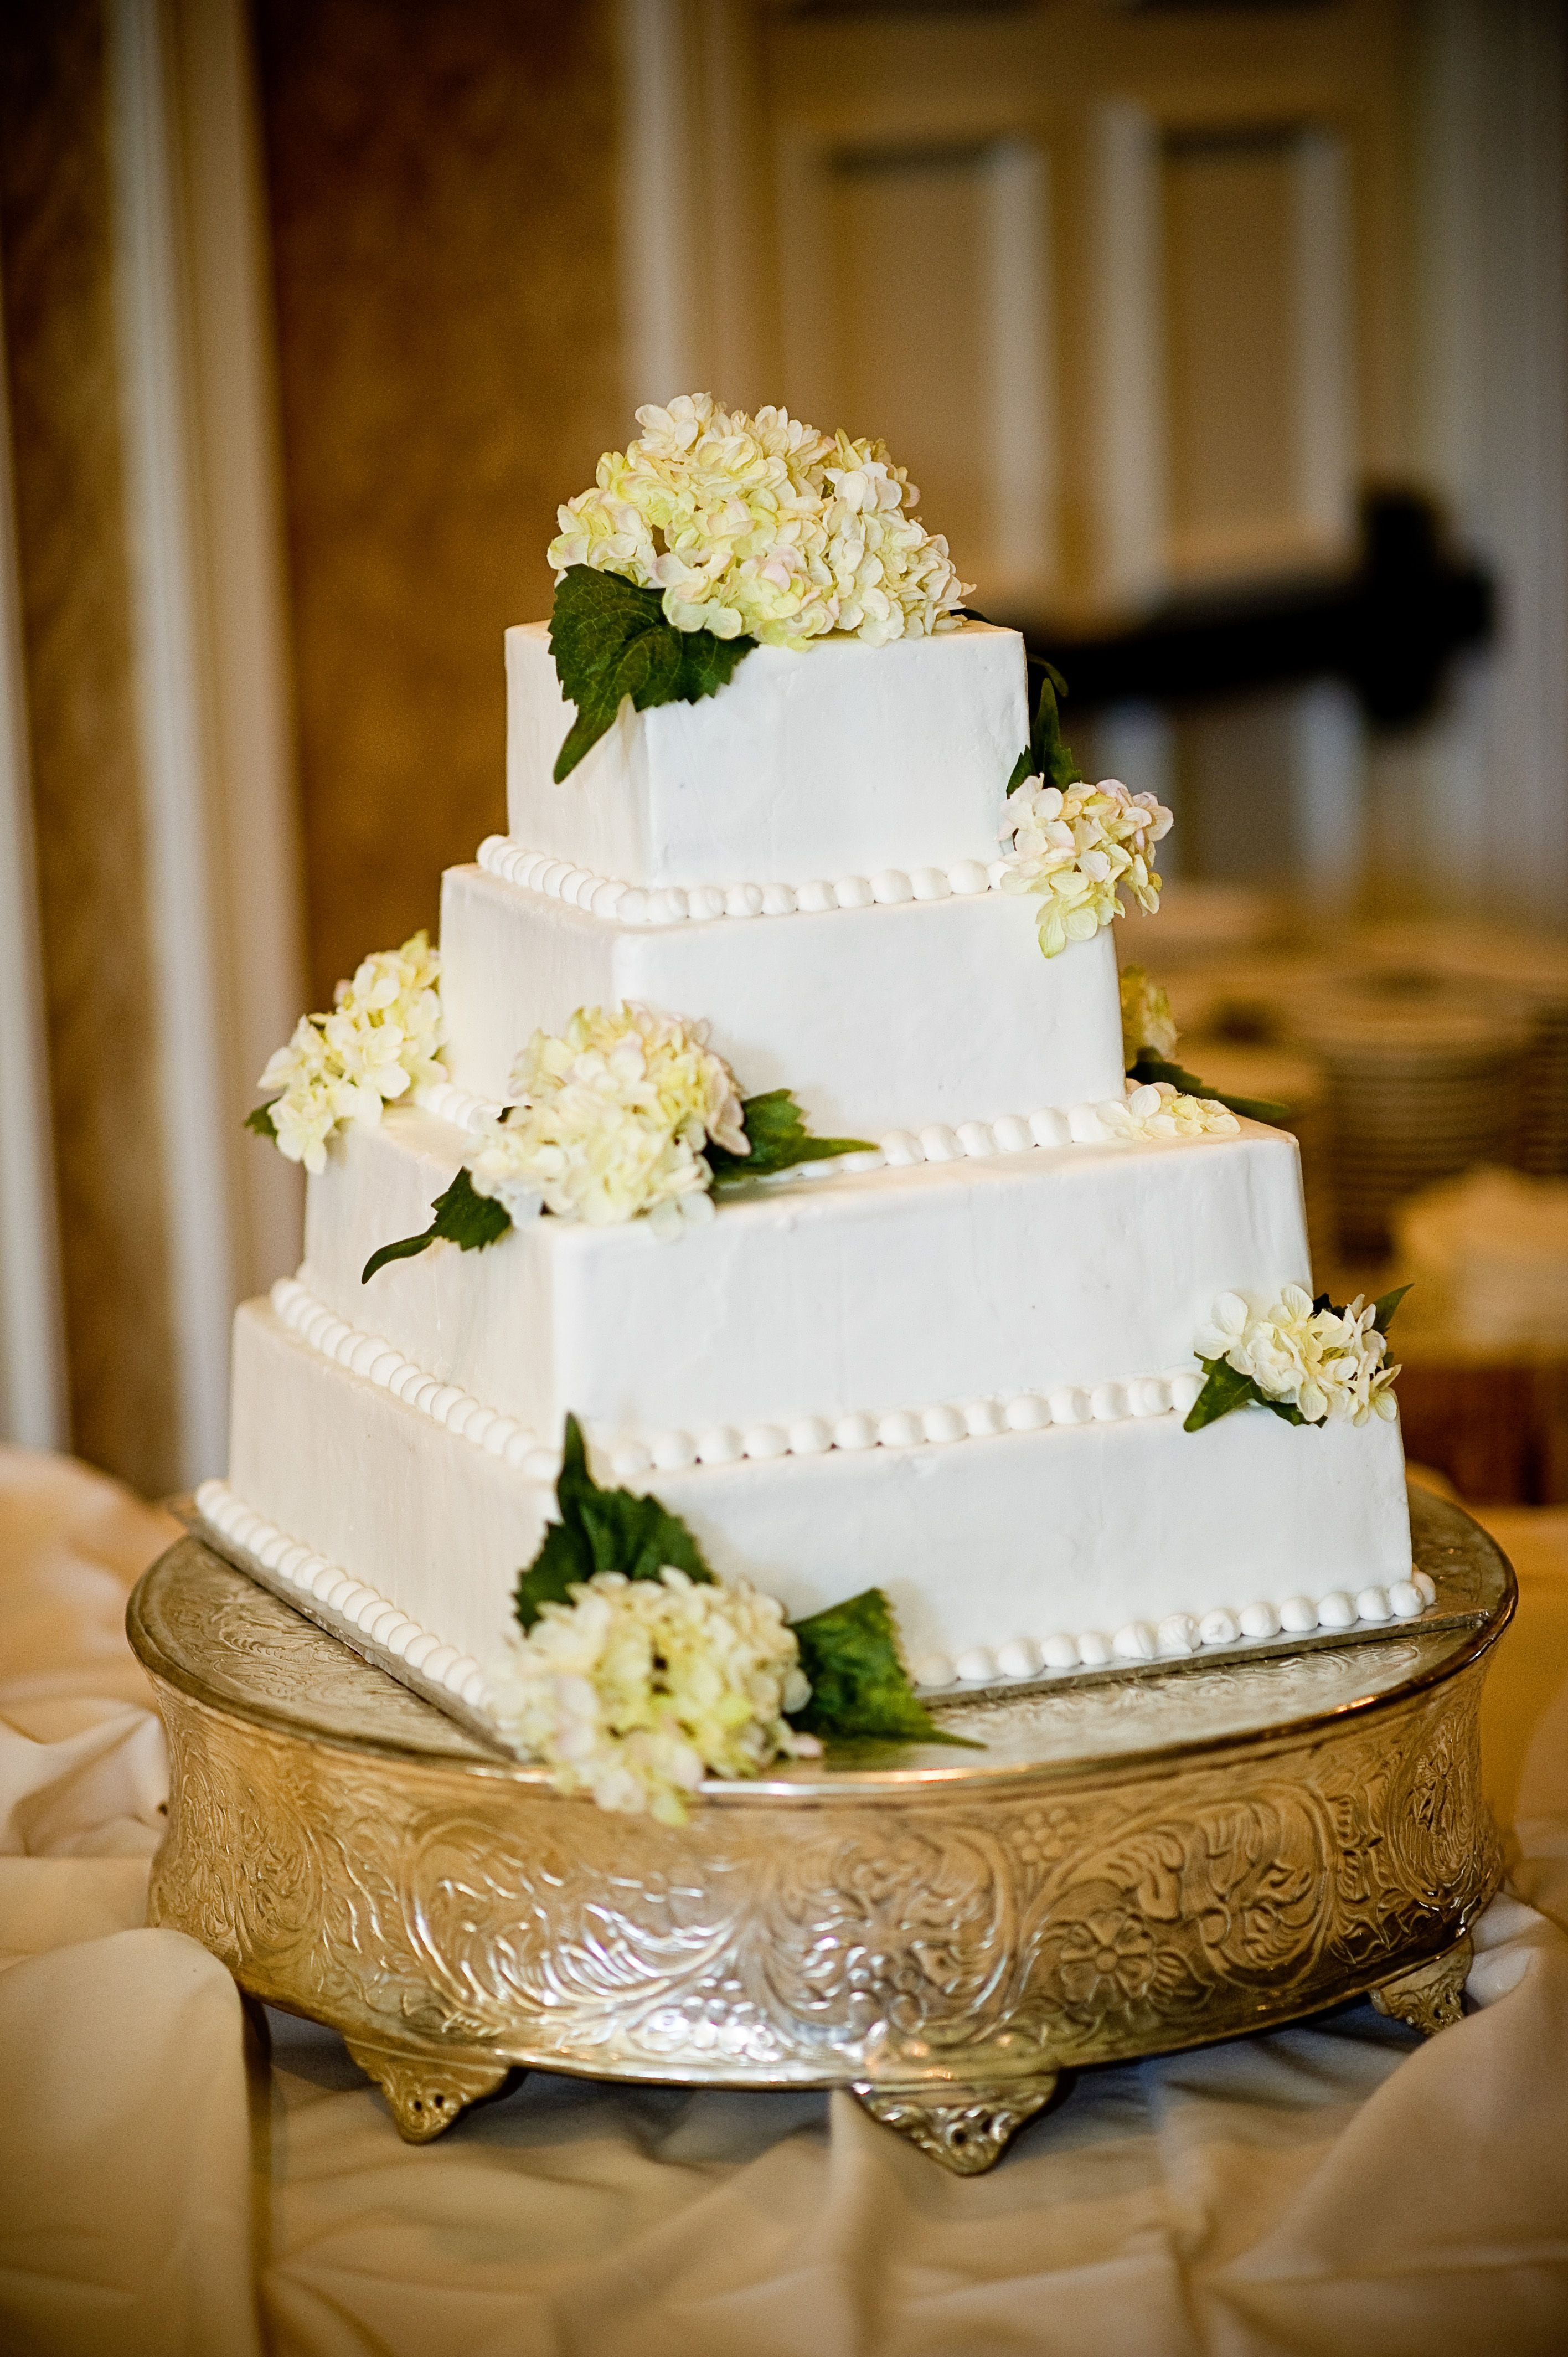 Simple Square Wedding Cakes
 Simple square wedding cake Traditional Southern pound